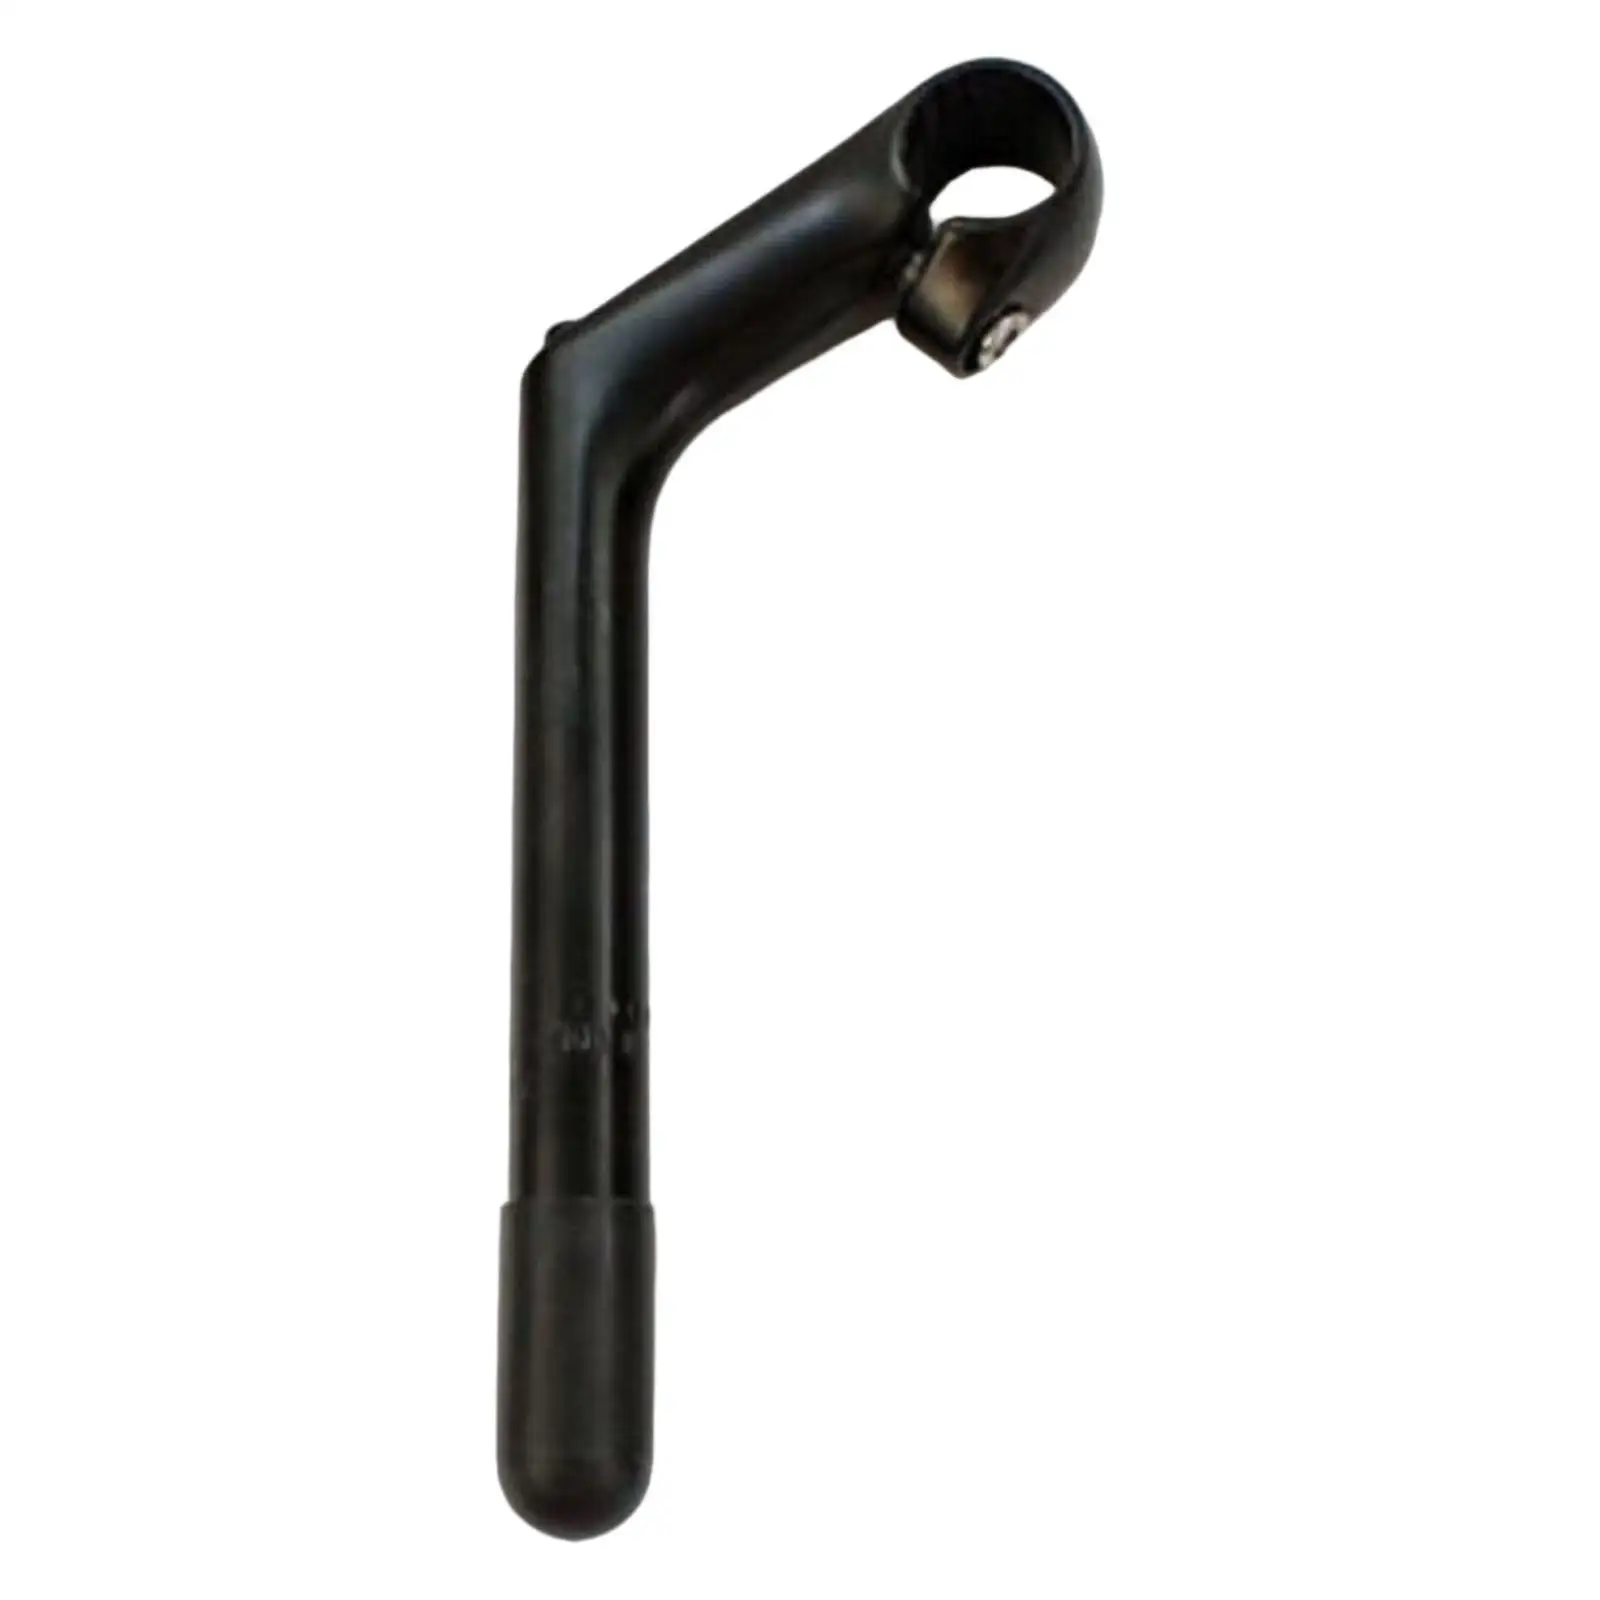 Clssic Hndle Br Stem with Threded Tube Gooseneck Shpe Sturdy luminum lloy Bicycle Quill Stem for Bech Cruiser Bikes